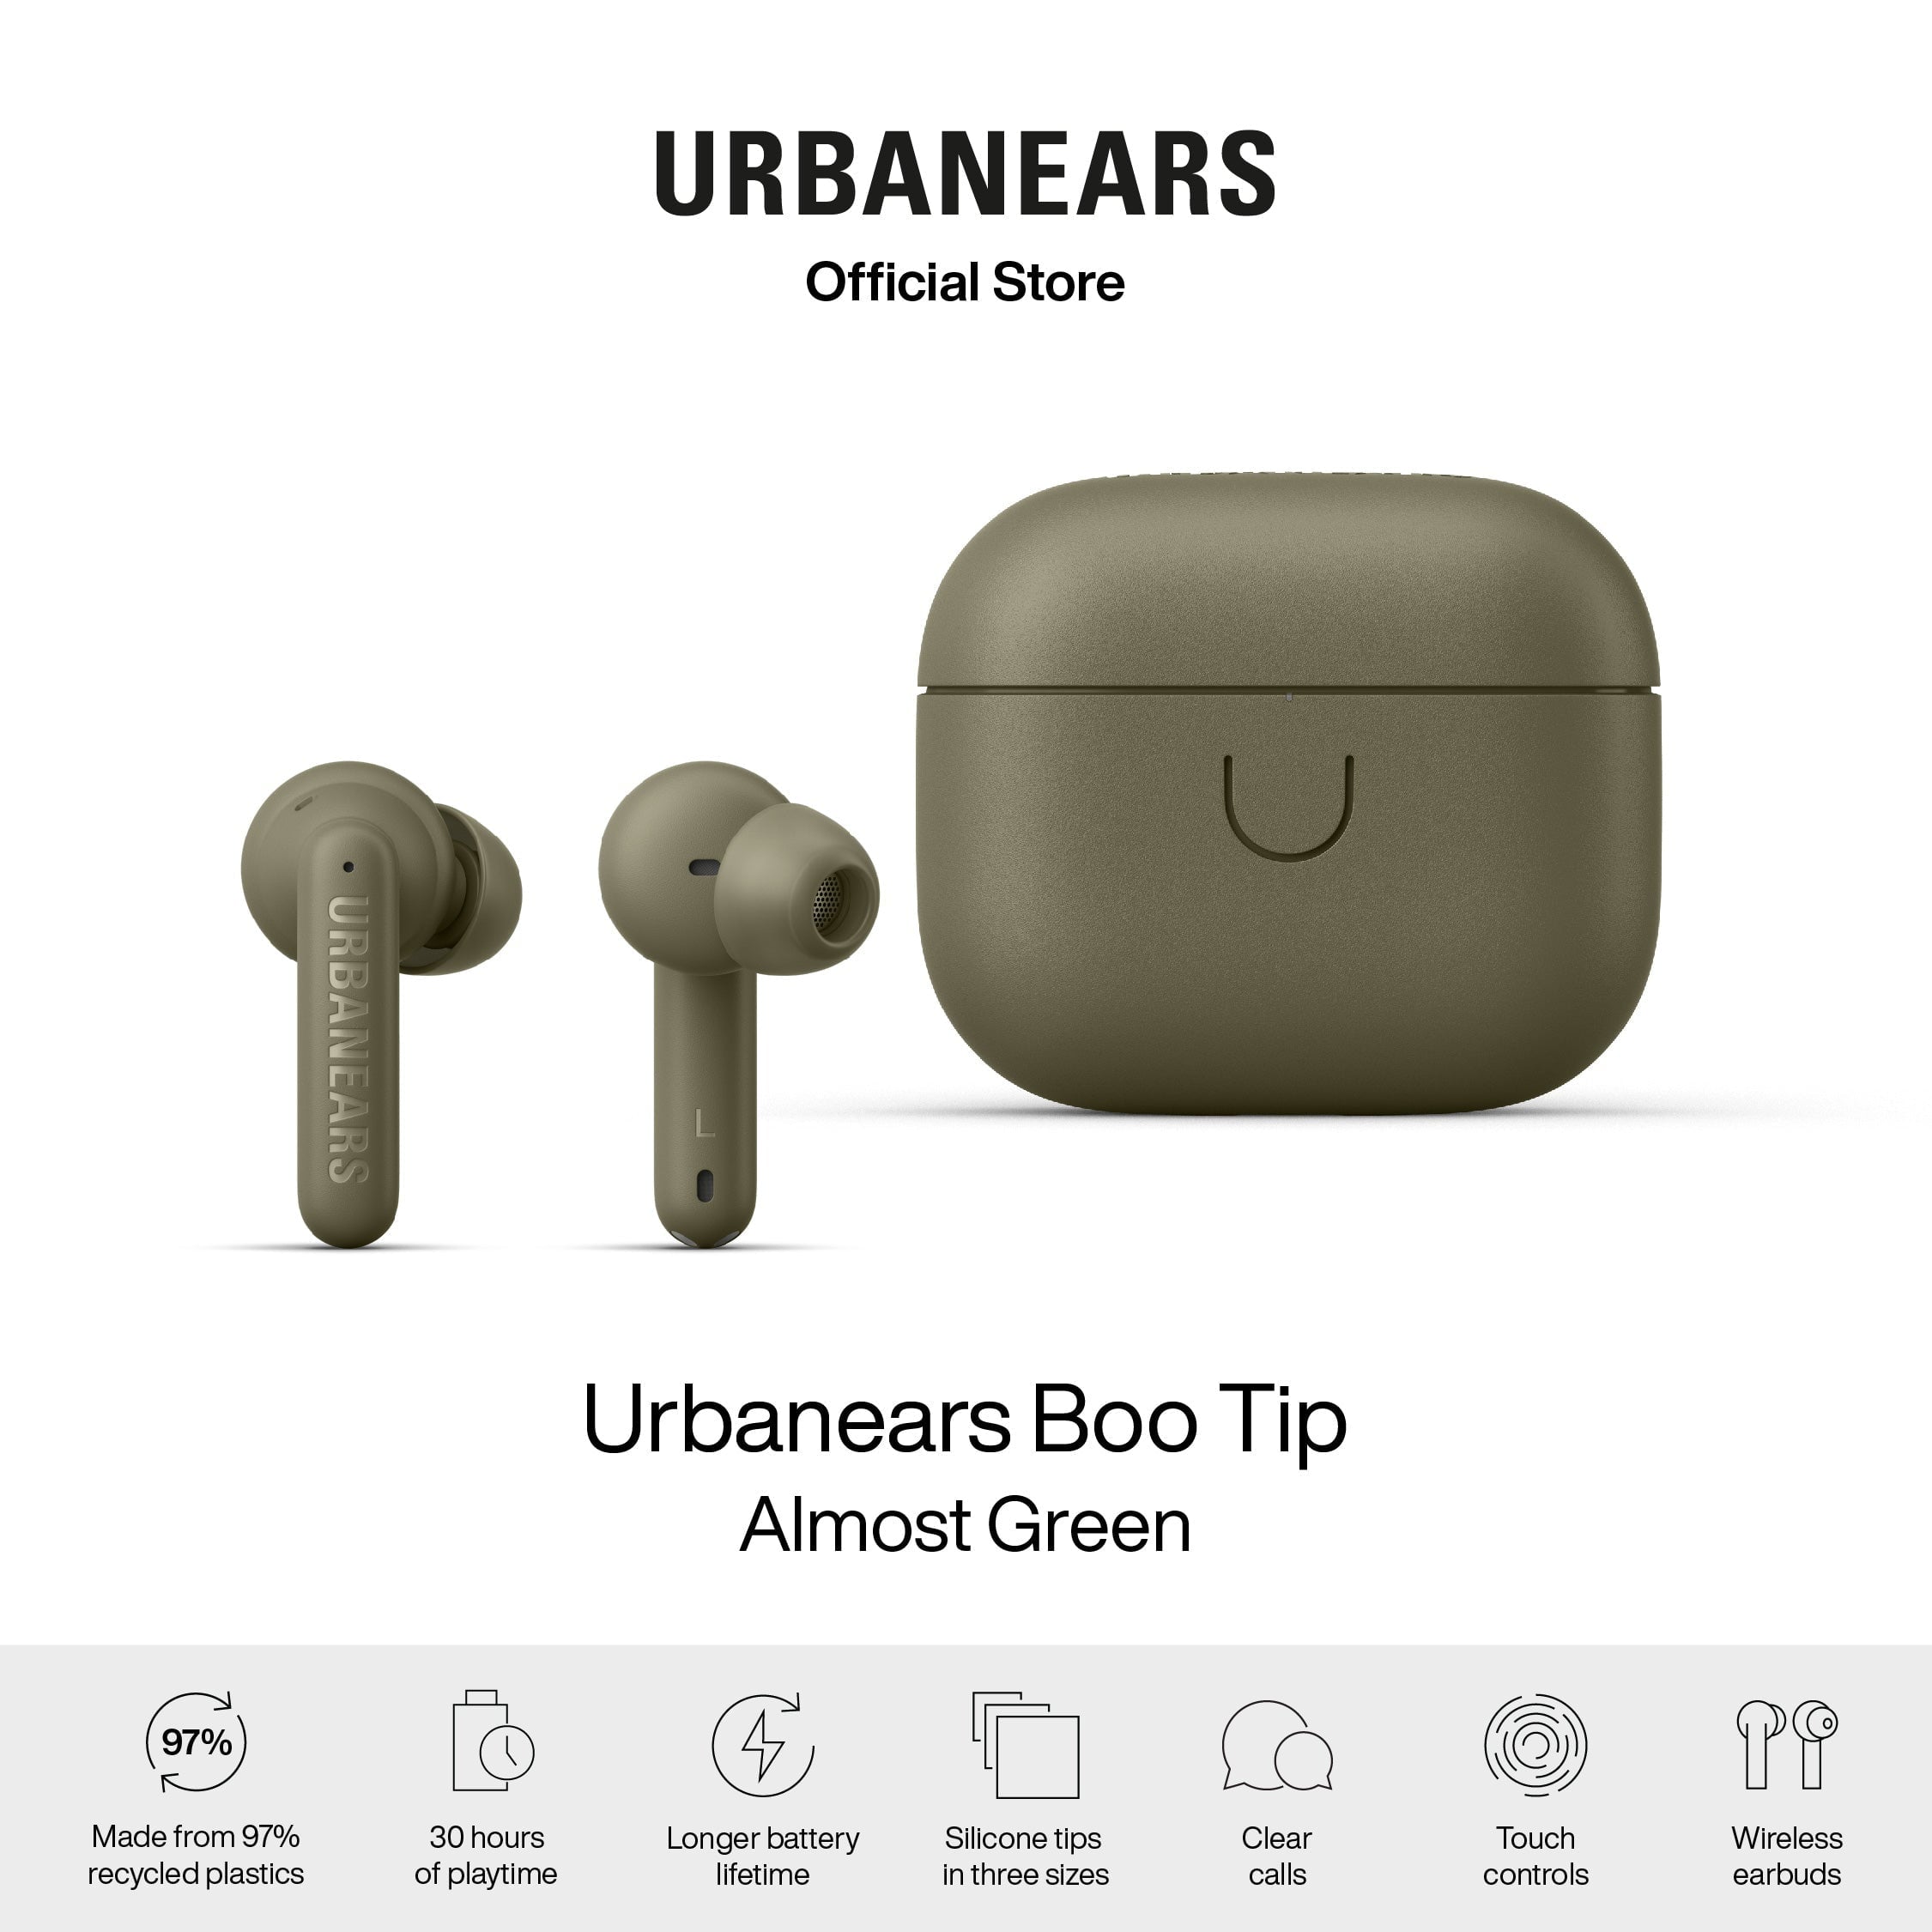 URBANEARS BOO TIP - ALMOST GREEN